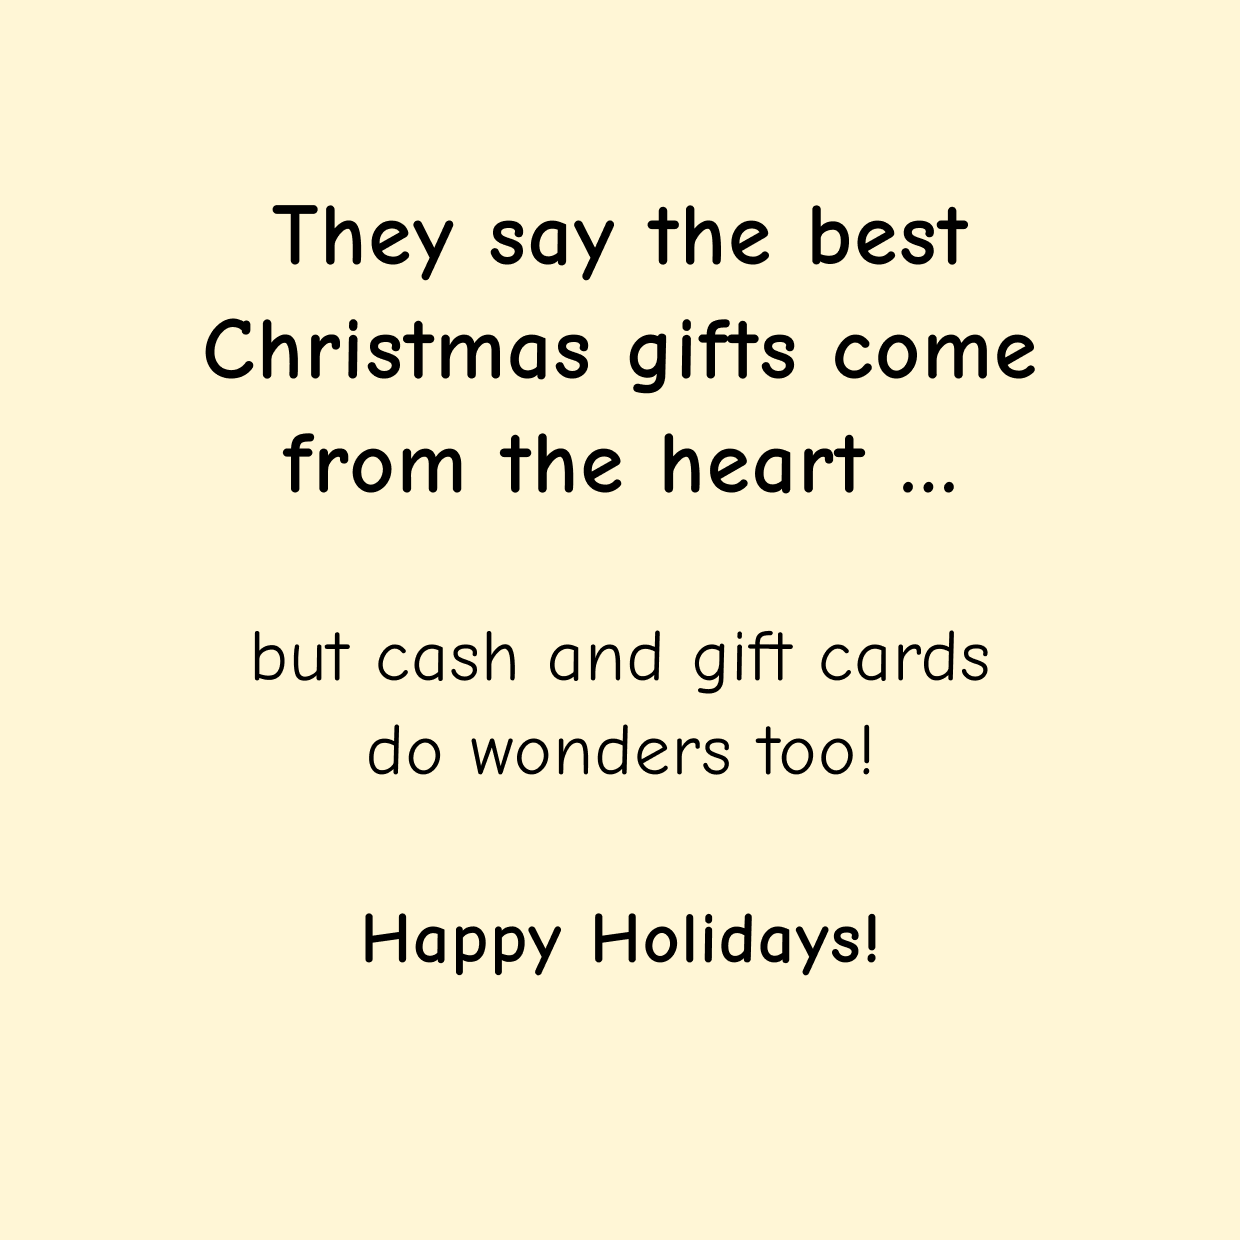 Free Christmas Postcard: Best Christmas Gifts Come from the Heart preview image.